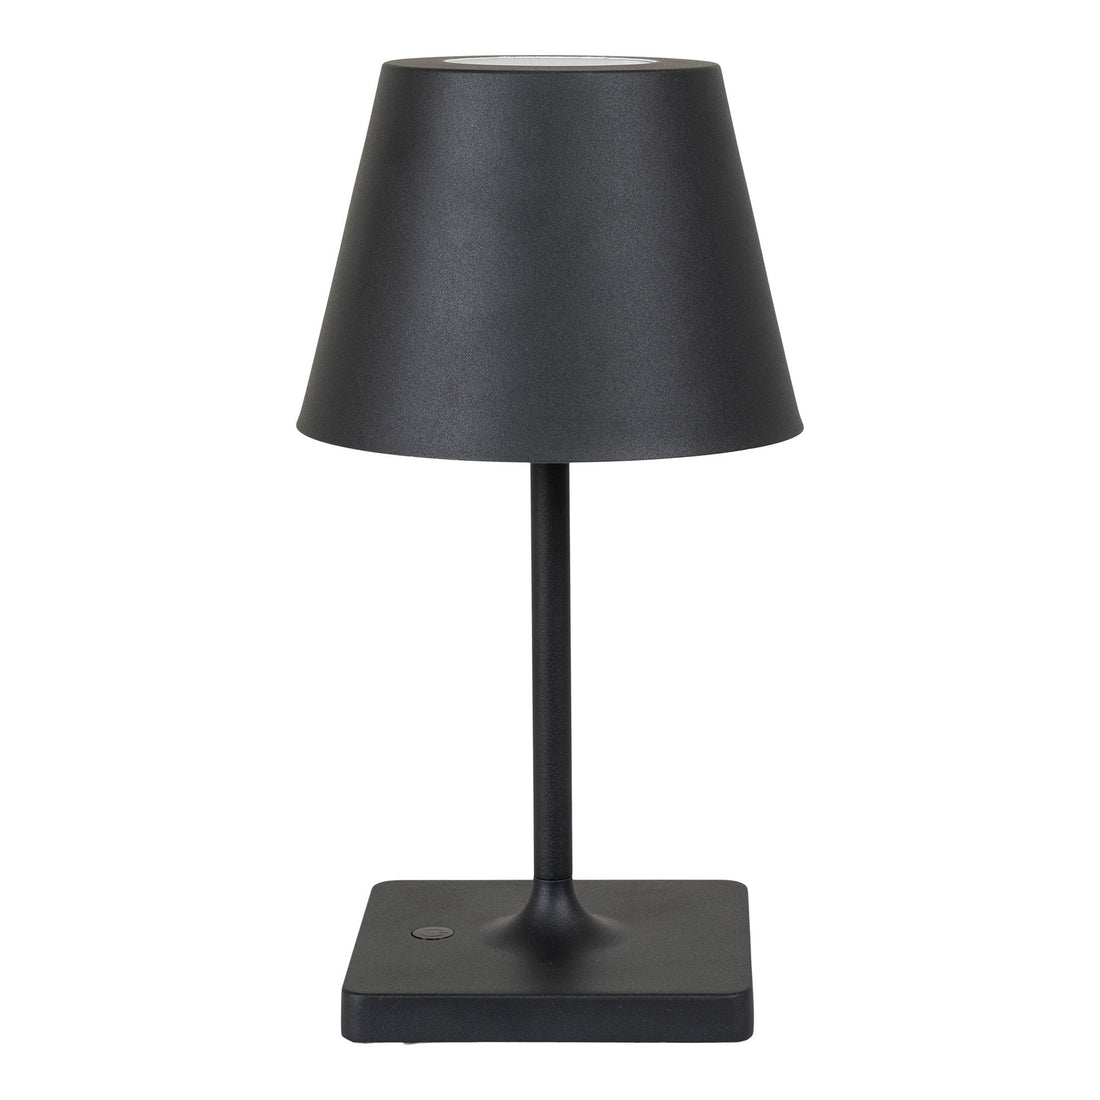 House Nordic Dean LED table lamp